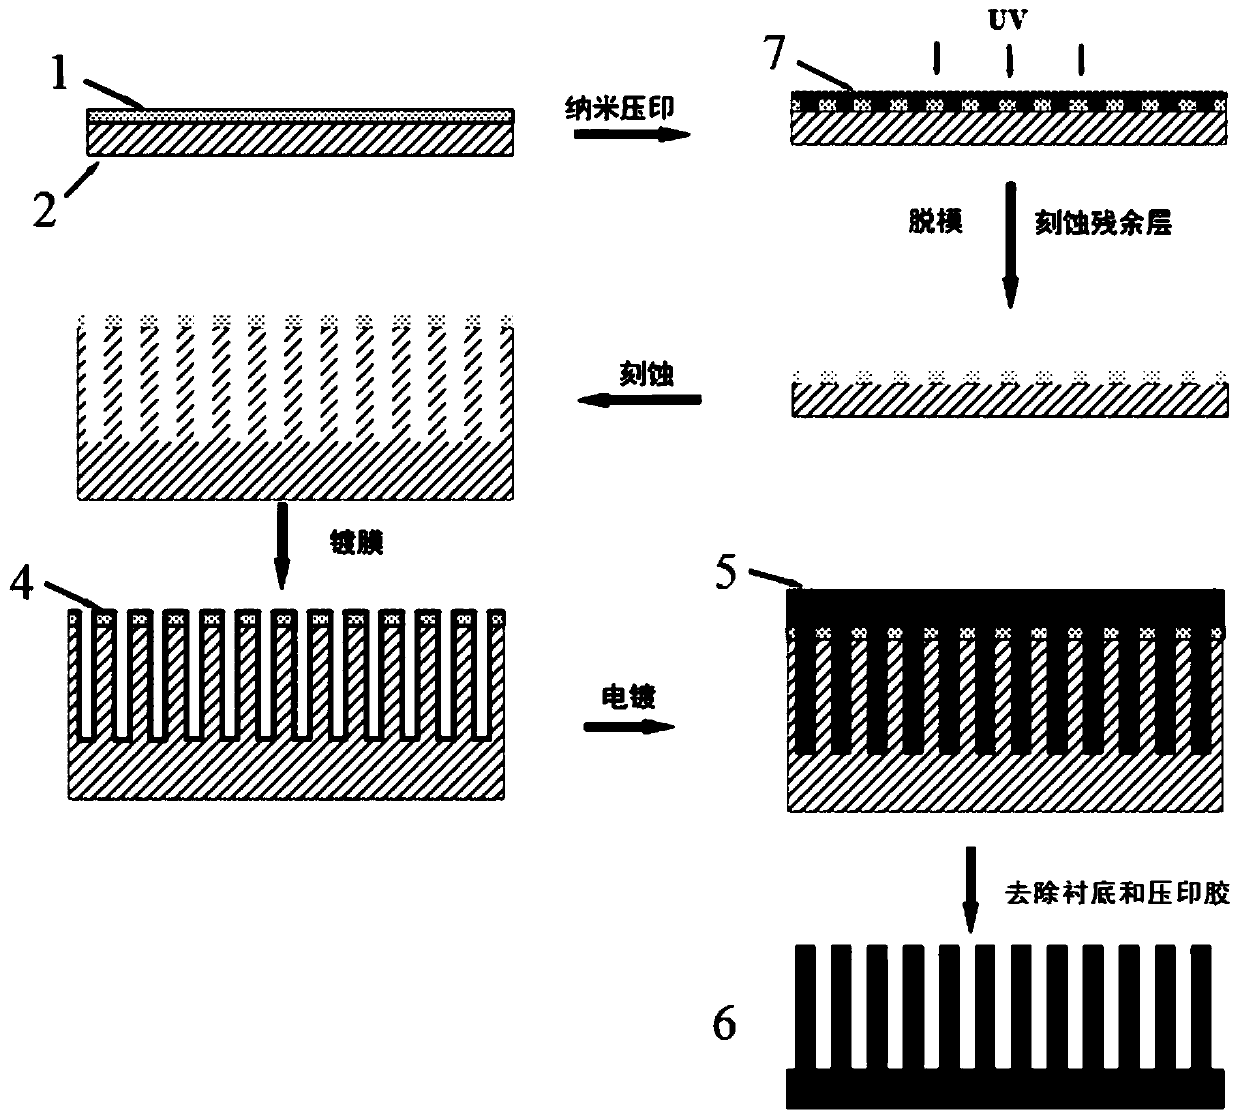 Metal micro/nano wire array and preparation method thereof